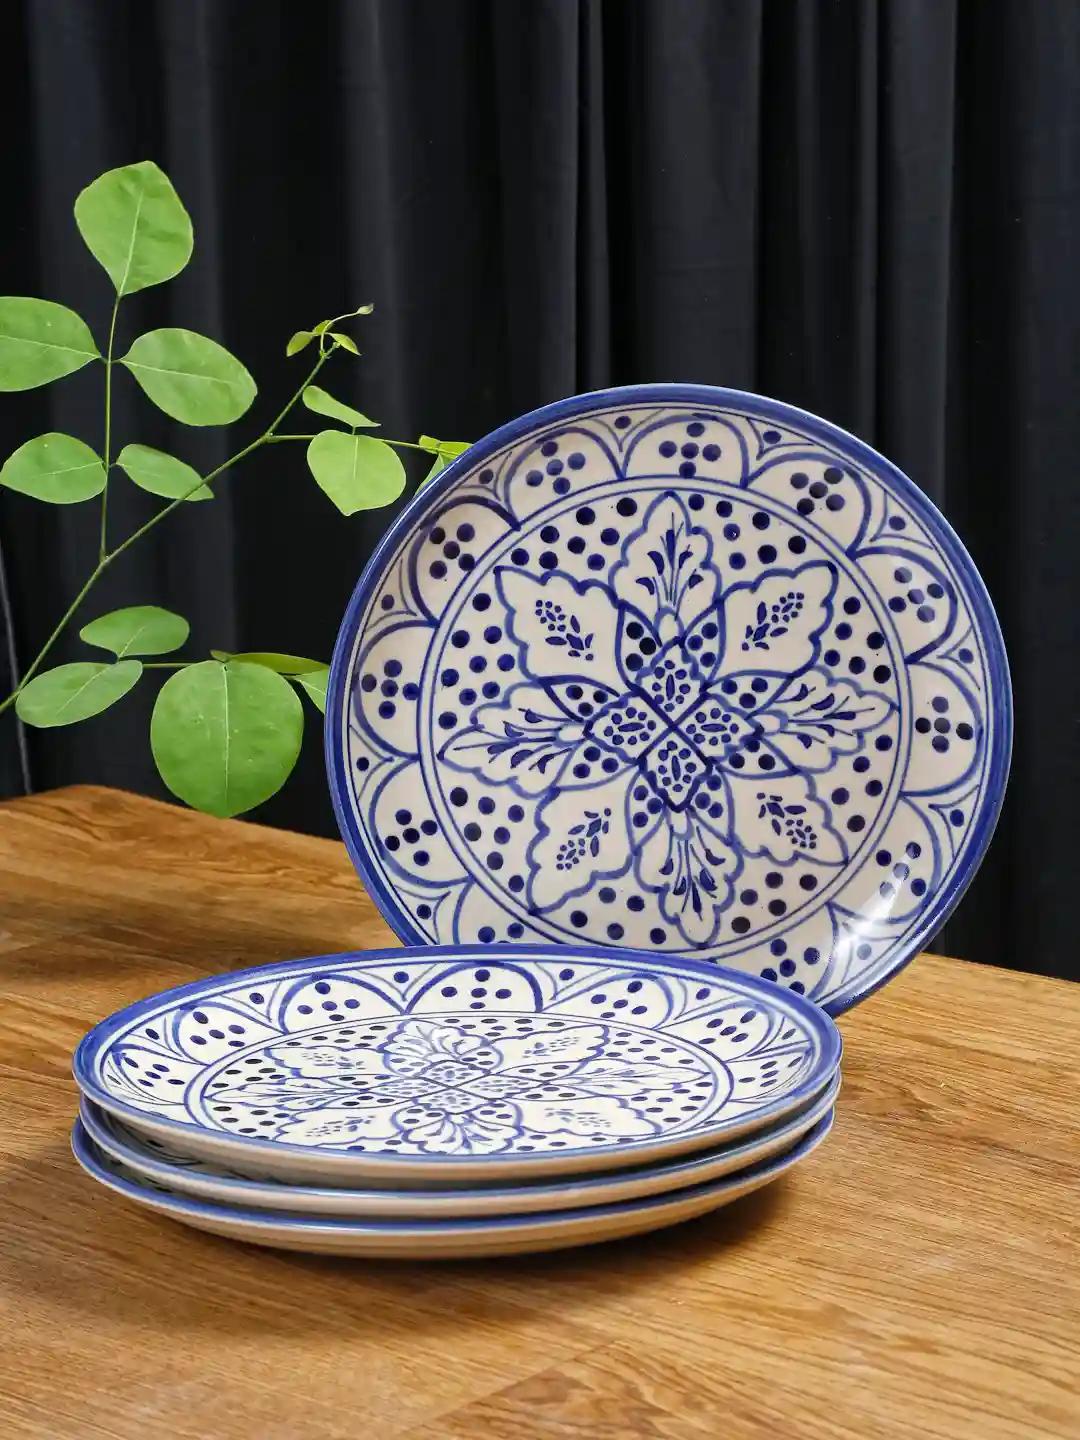 Shilpkara 'Moroccan Bloom' Hand Painted Studio Pottery Ceramic Plates For Dinner 10 Inch